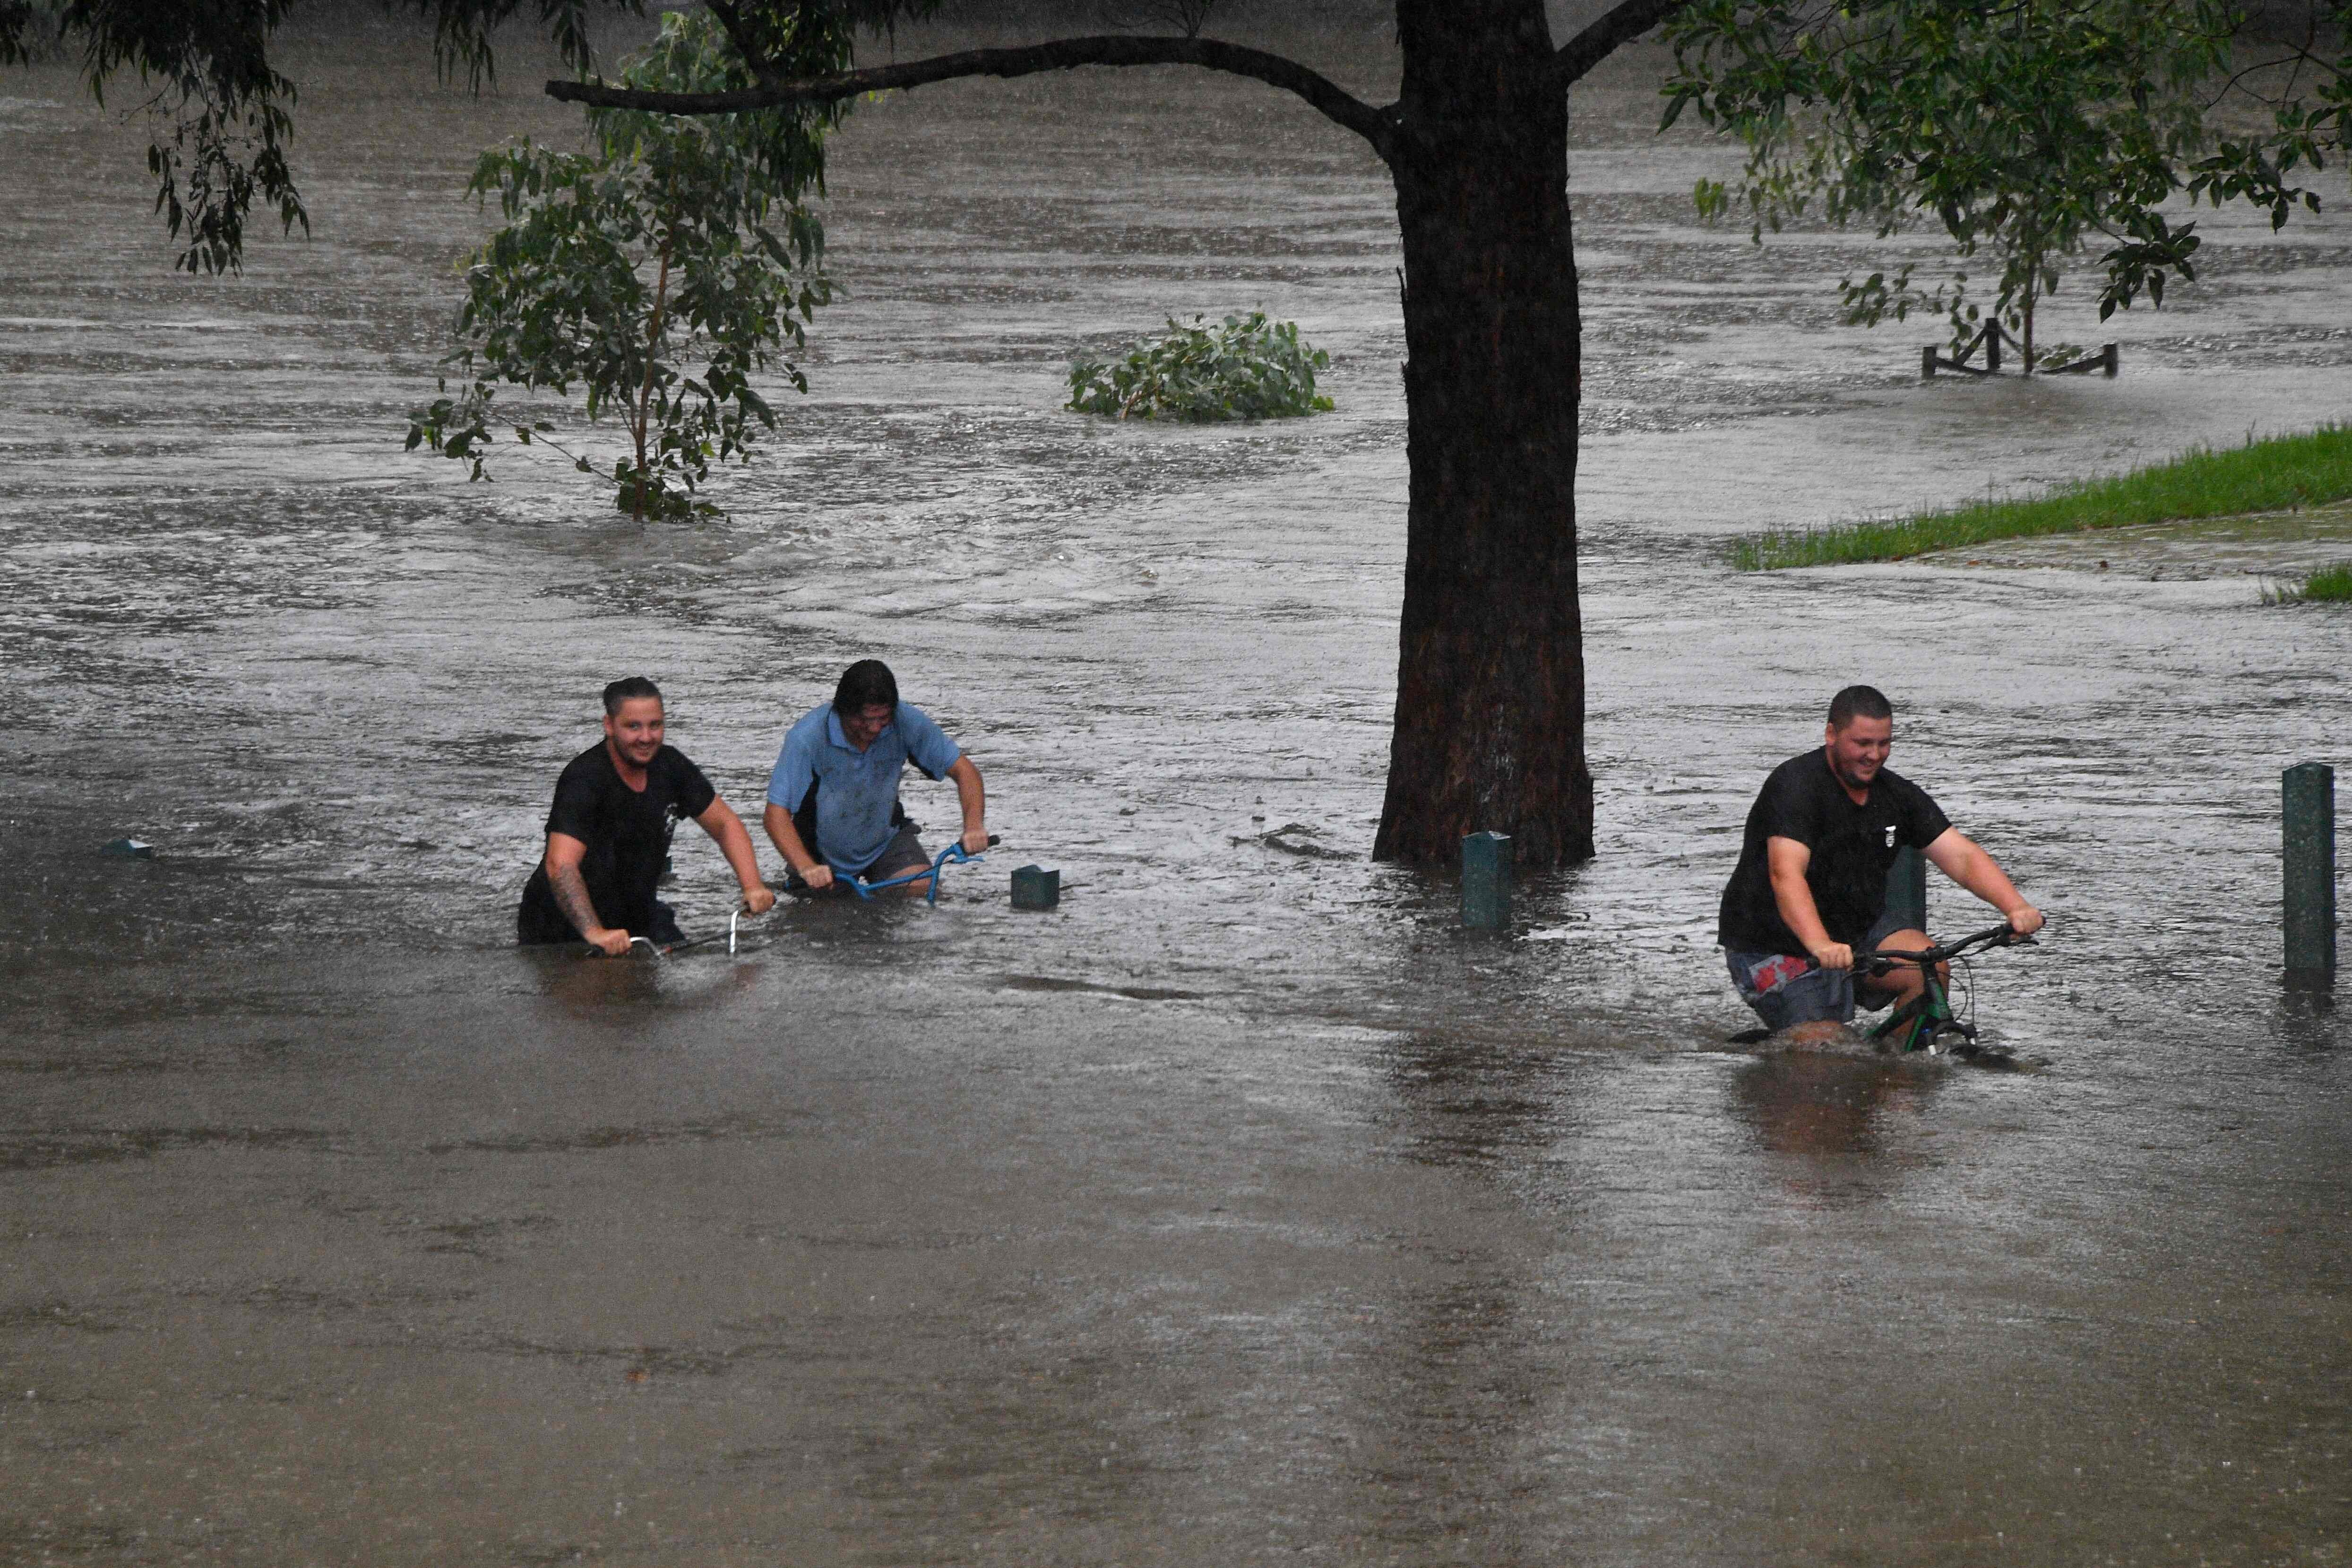 People ride bicycles through a flooded park in Penrith, Sydney. Photo: AFP